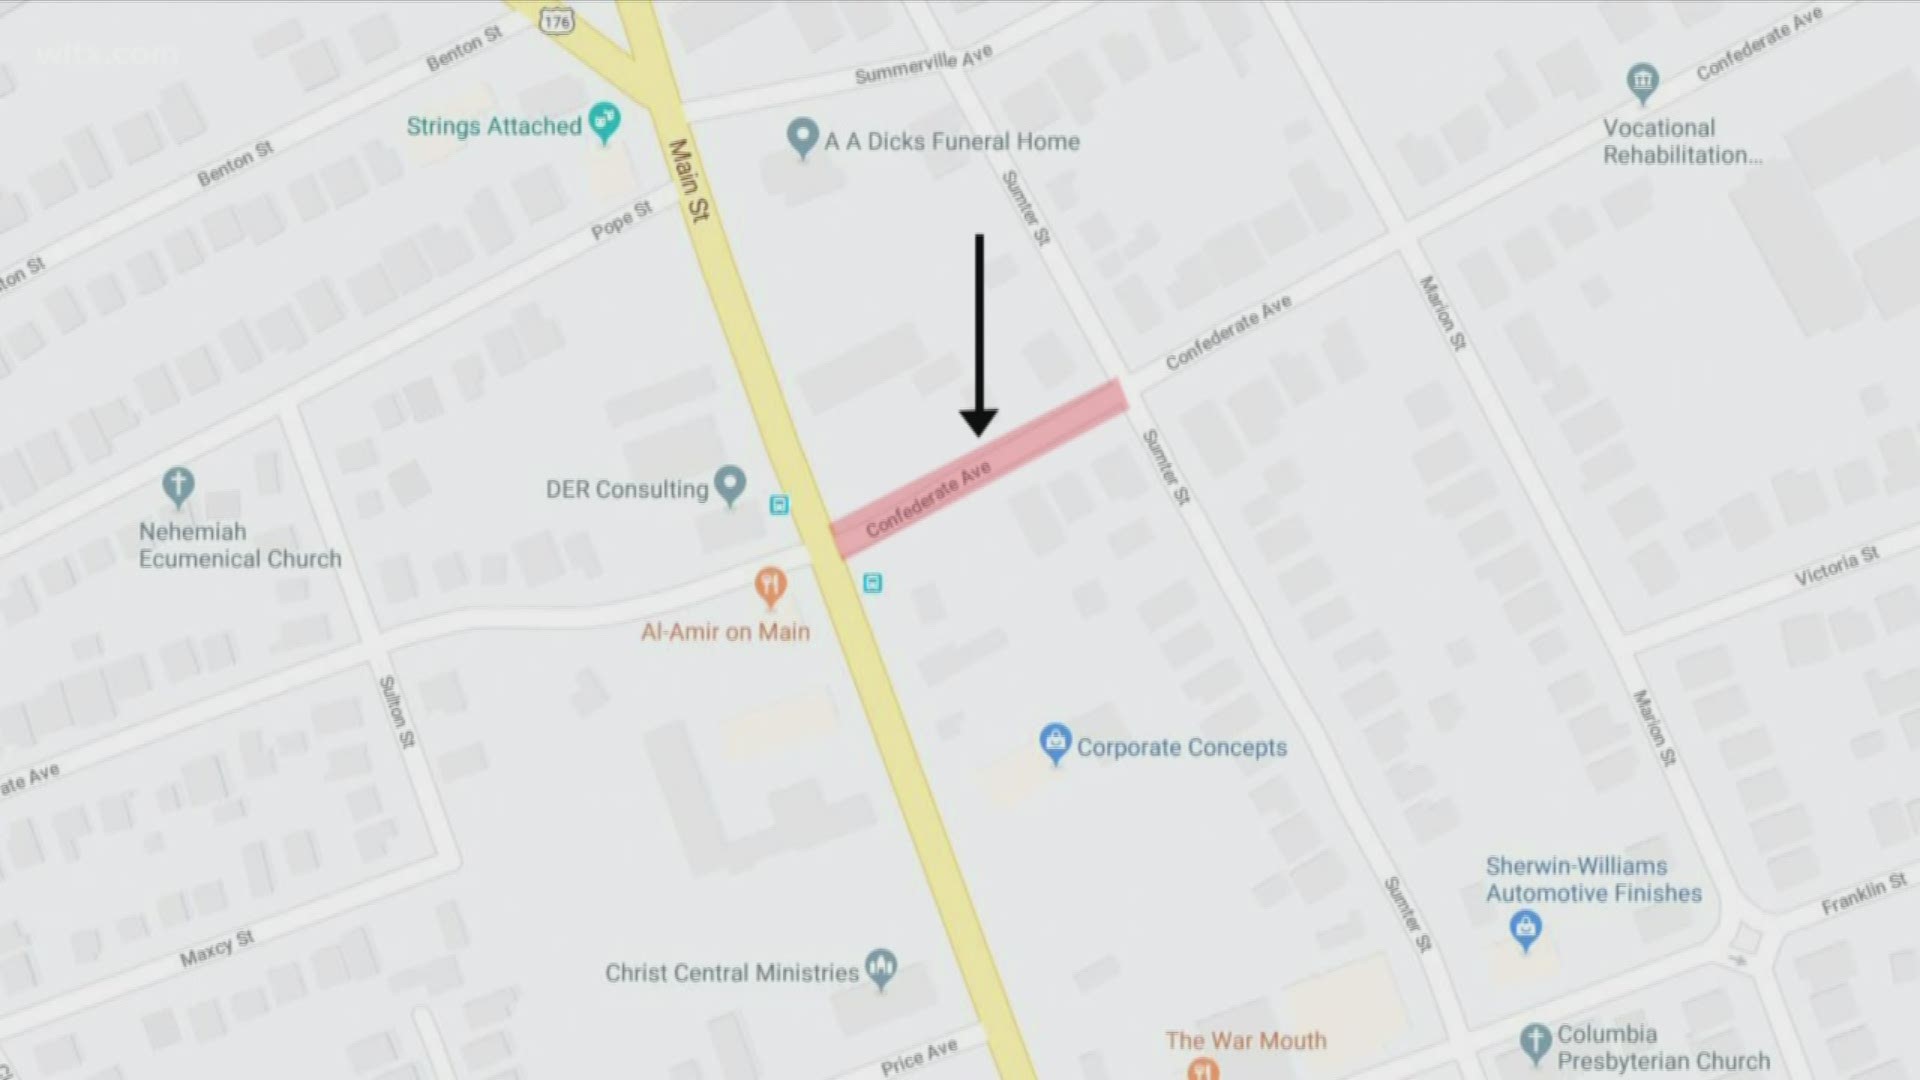 The city is making a few repairs and closing West Confederate avenue from Main street to Sumter street will close starting on Friday at 9 am.